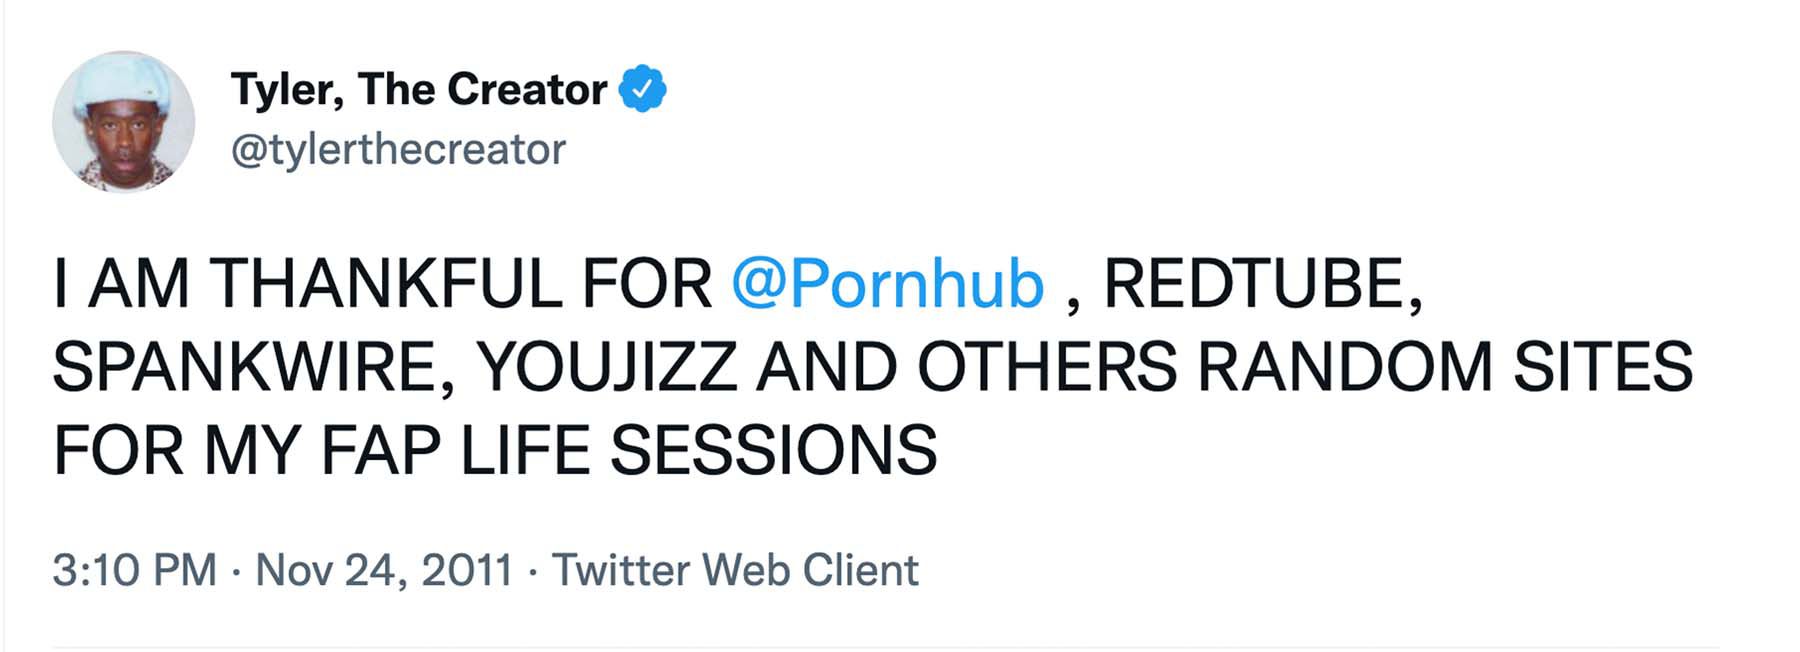 A tweet from Tyler, The Creator on November 24, 2011 that says, “I AM THANKFUL FOR @PORNHUB, REDTUBE, SPANKWIRE, YOUJIZZ AND OTHERS RANDOM SITES FOR MY FAP LIFE SESSIONS”